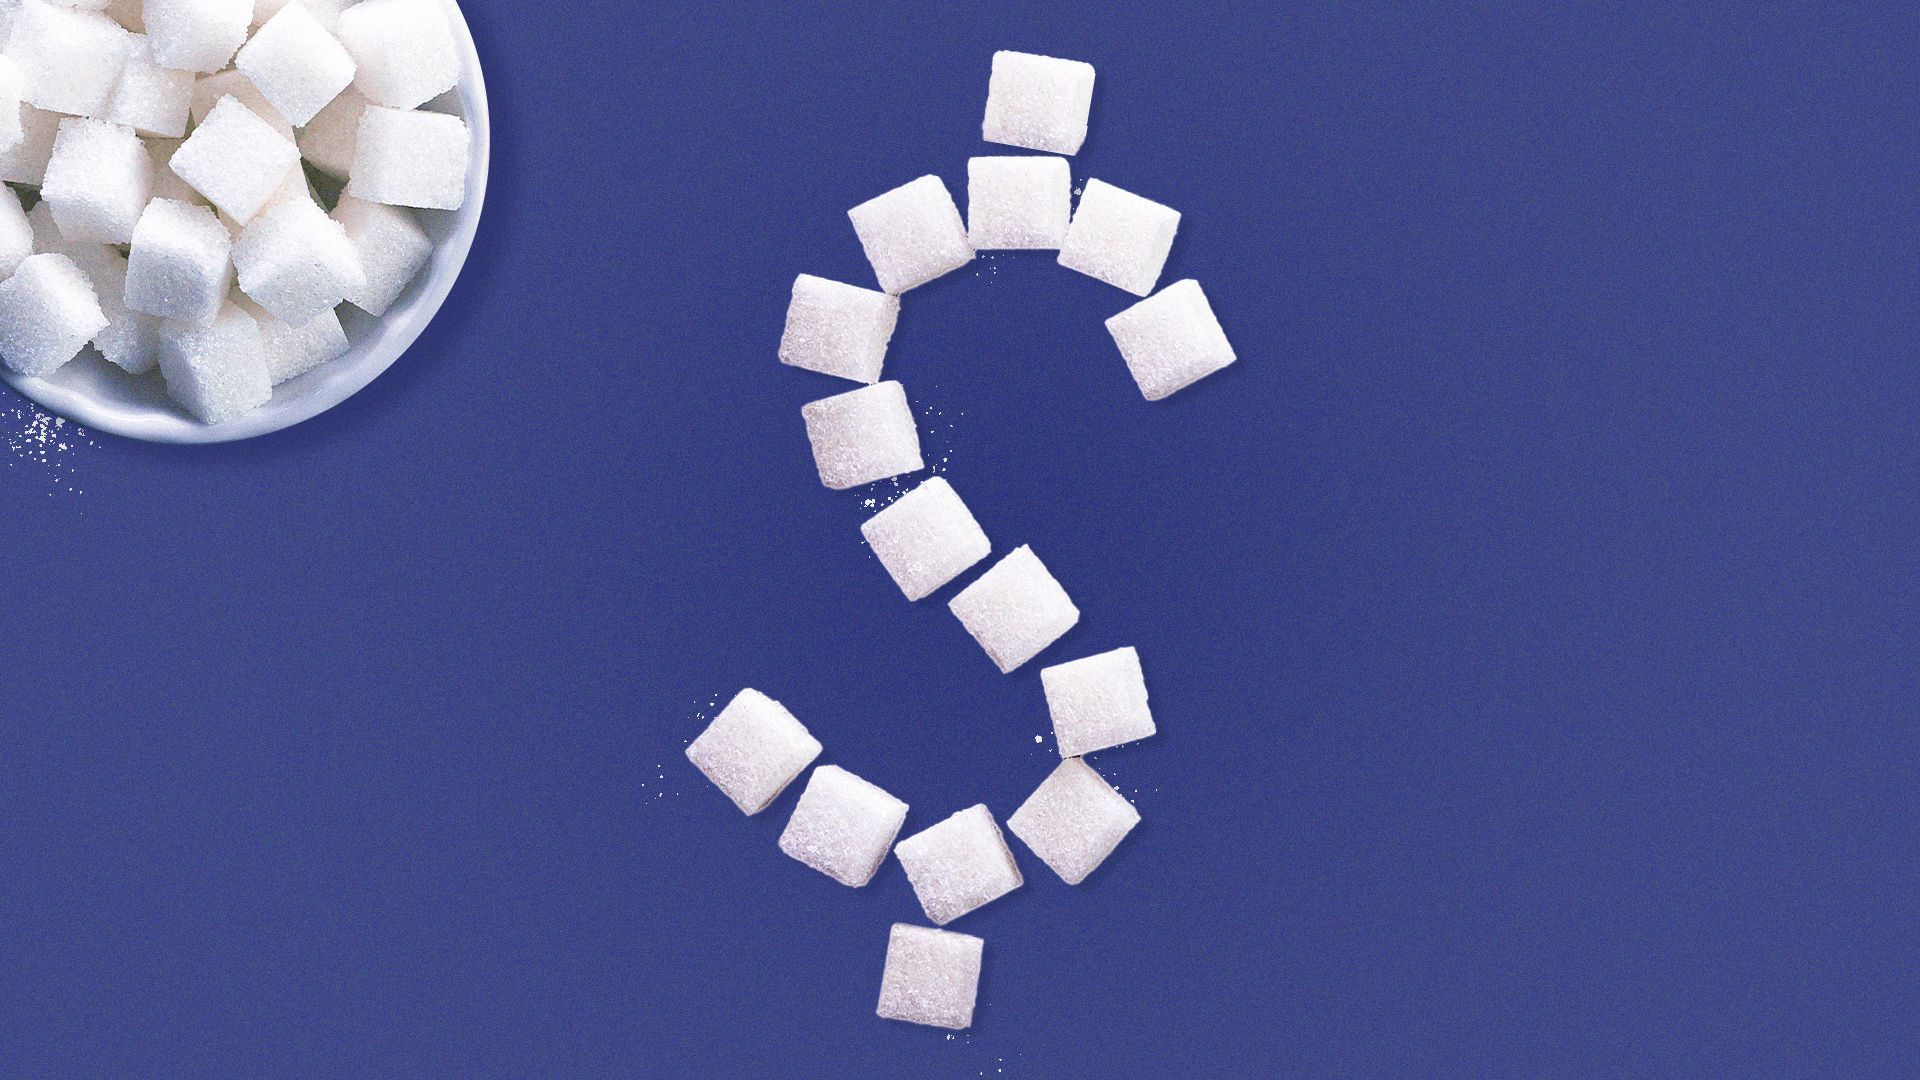 Illustration of sugar cubes forming the shape of a dollar sign.